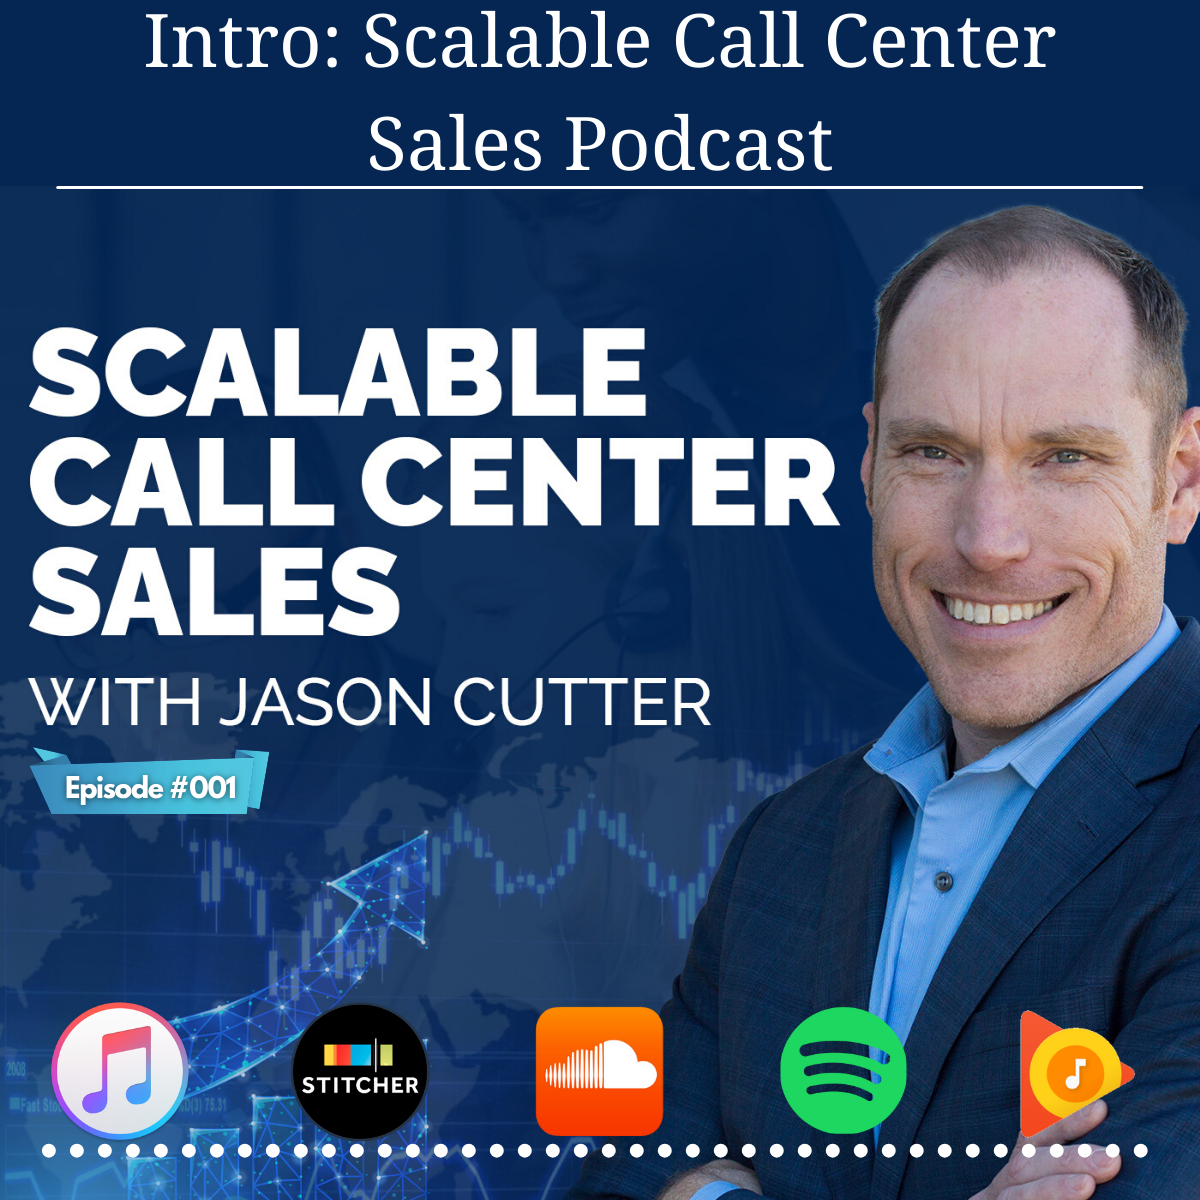 [001] Intro: Scalable Call Center Sales Podcast